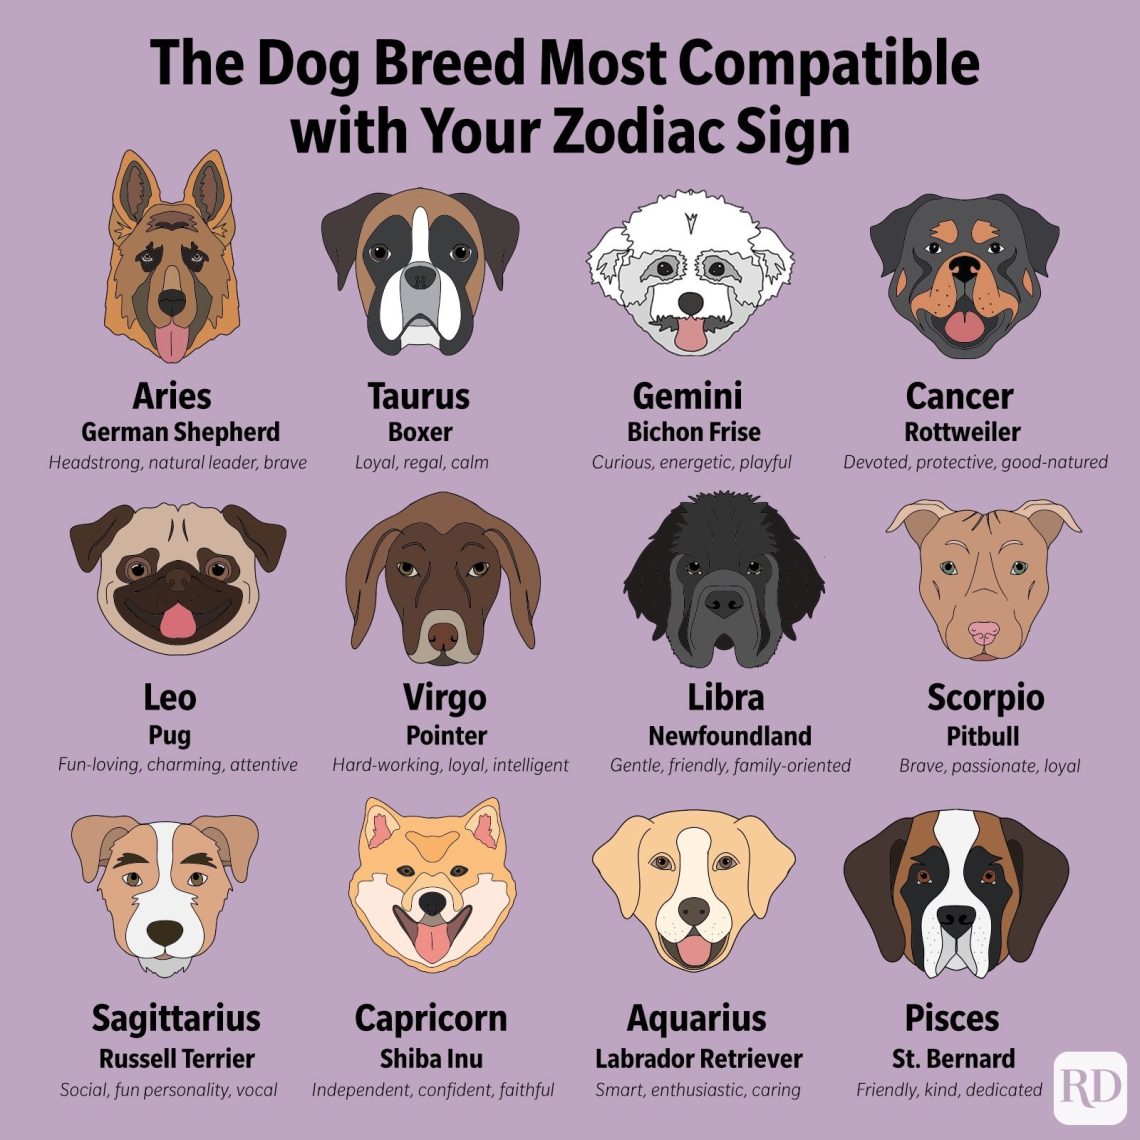 What is your dog according to the zodiac sign?